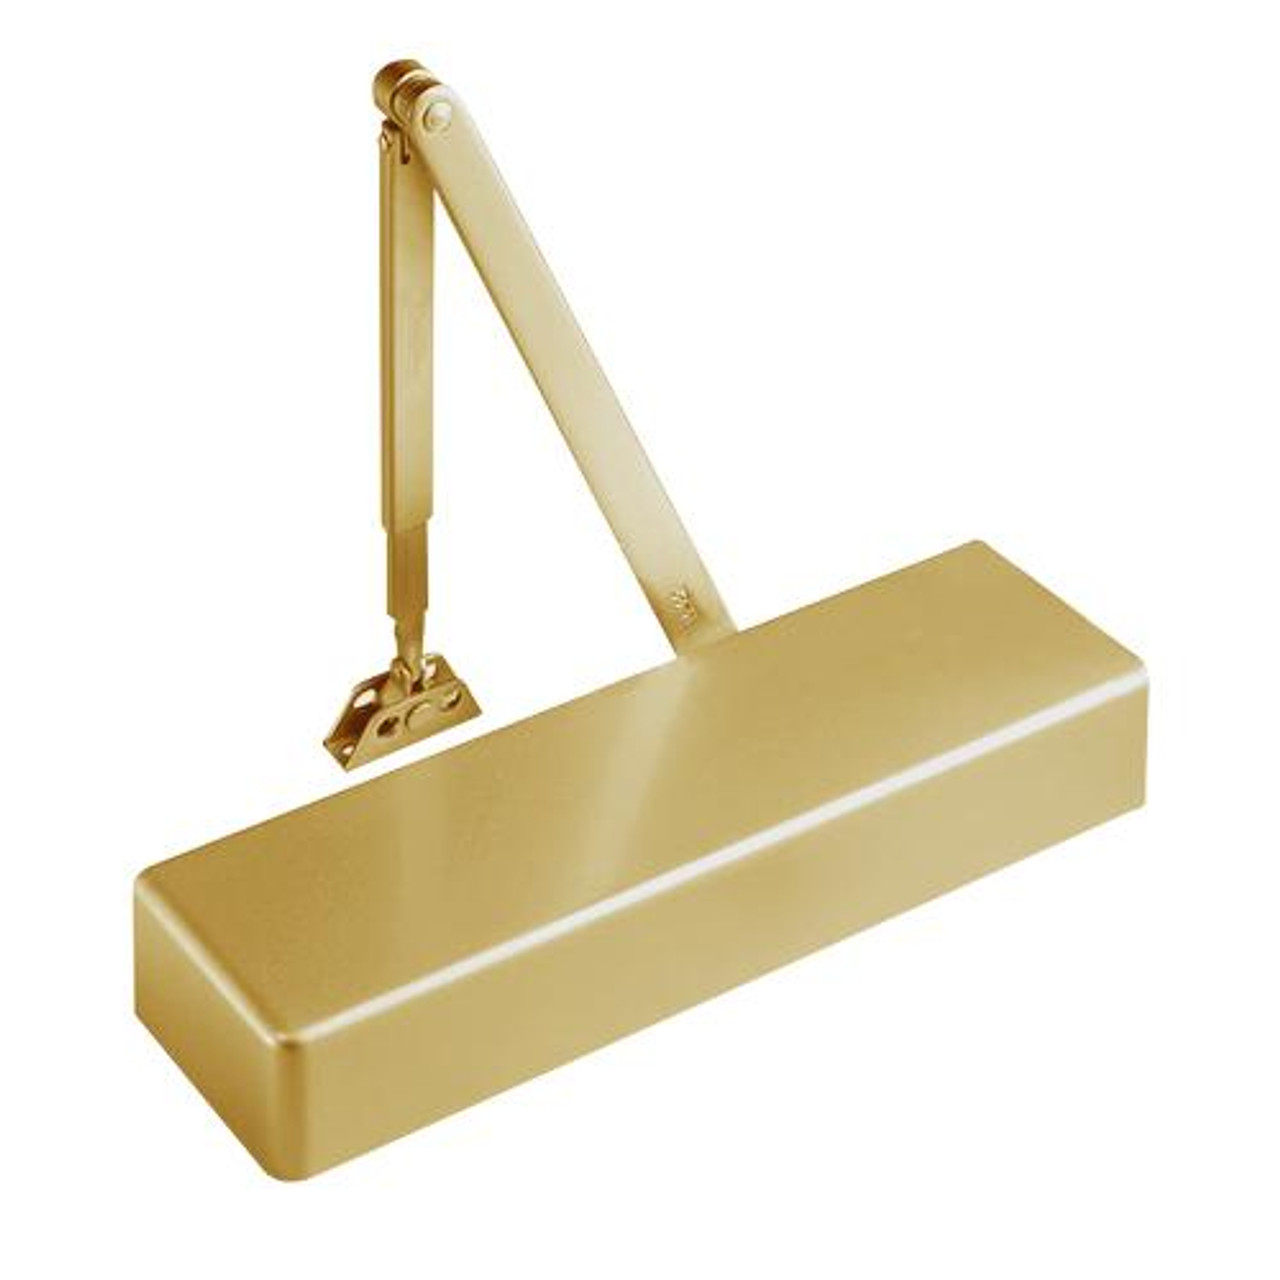 4400-696 Yale 4400 Series Institutional Door Closer with Regular Parallel and Top Jamb in Satin Brass